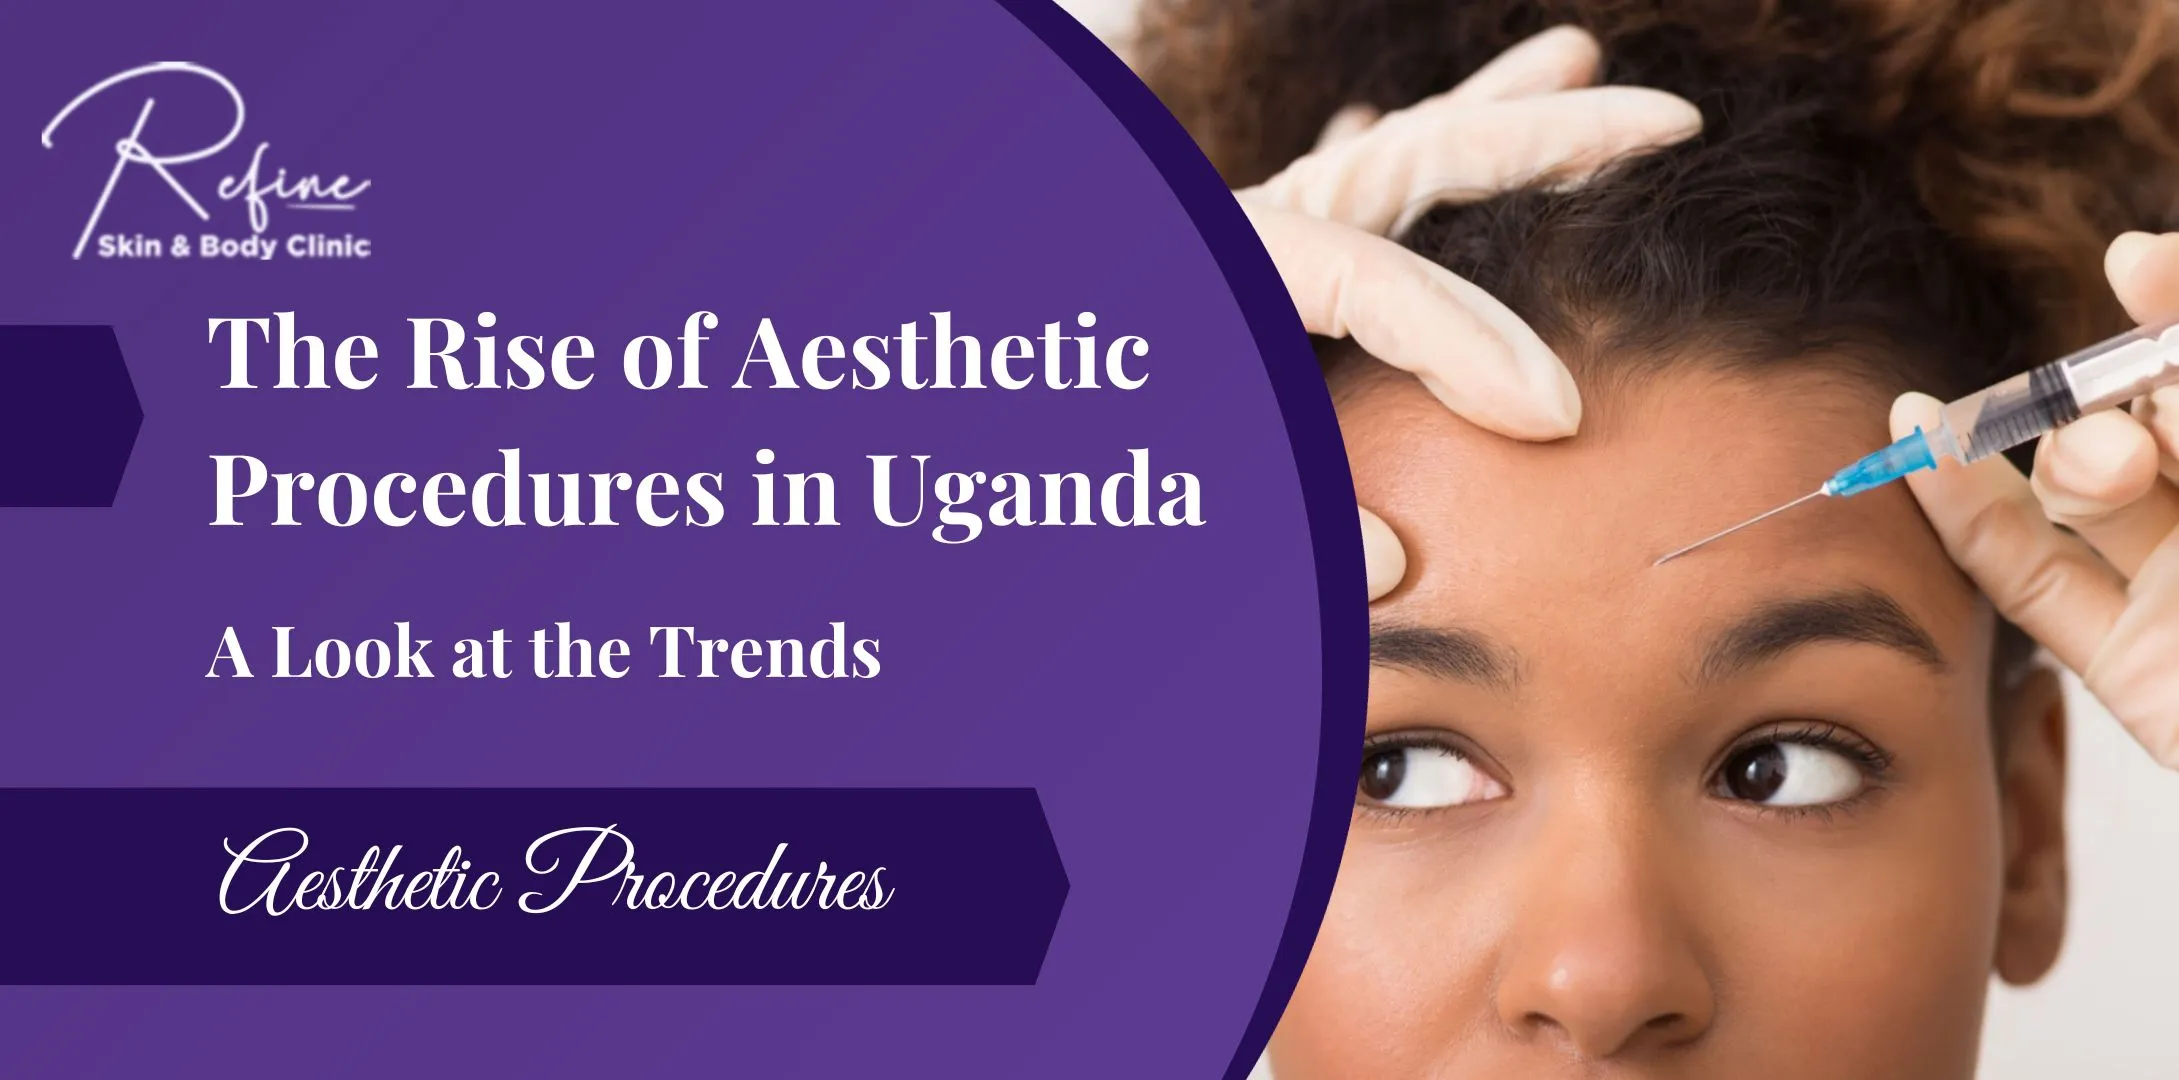 The Rise of Aesthetic Procedures in Uganda: A Look at the Trends